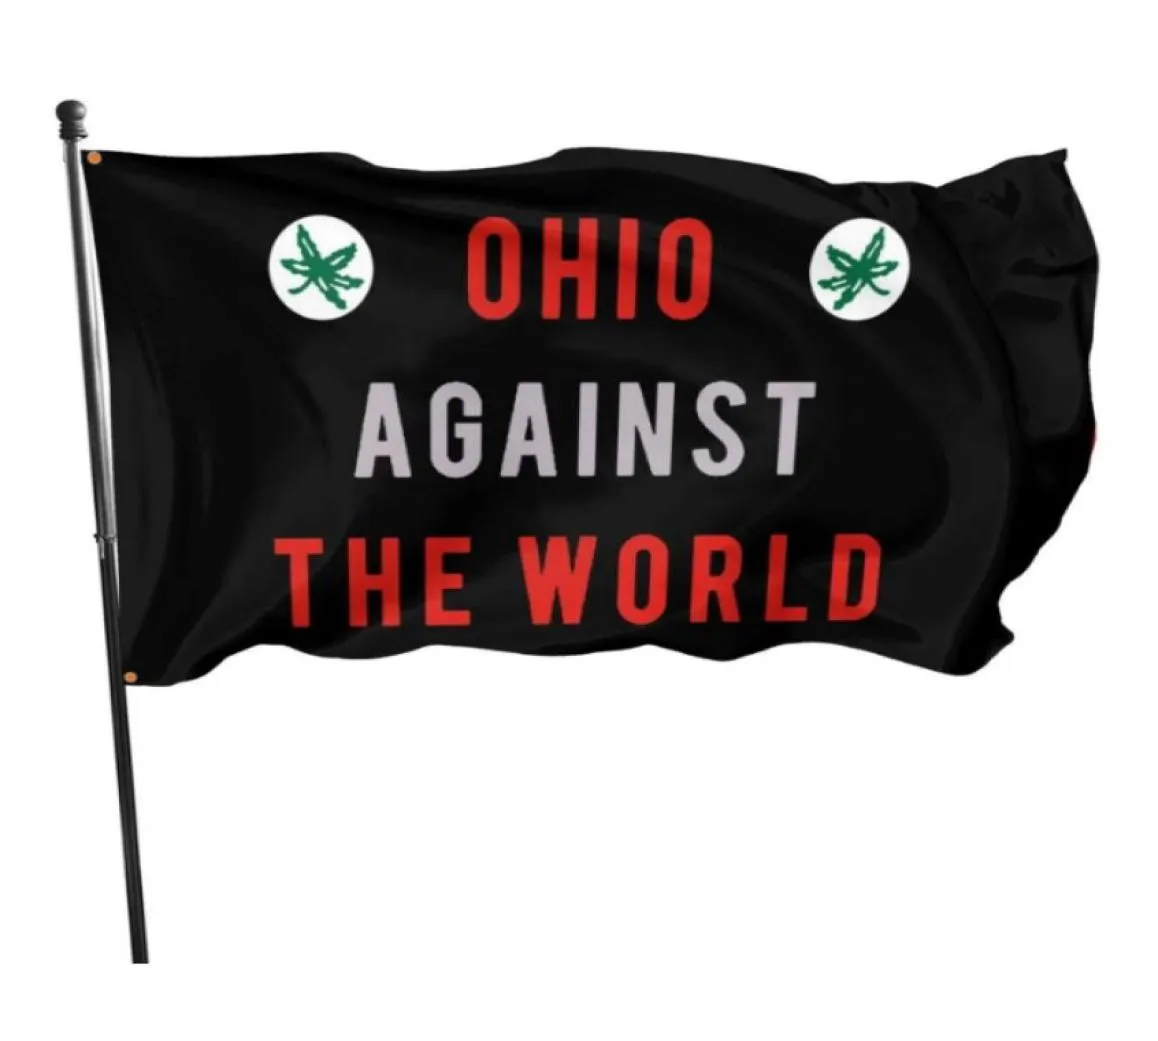 Ohio Against The World Flags Banners 3039 x 5039ft 100D Polyester Fast With Two Brass Grommets6498887